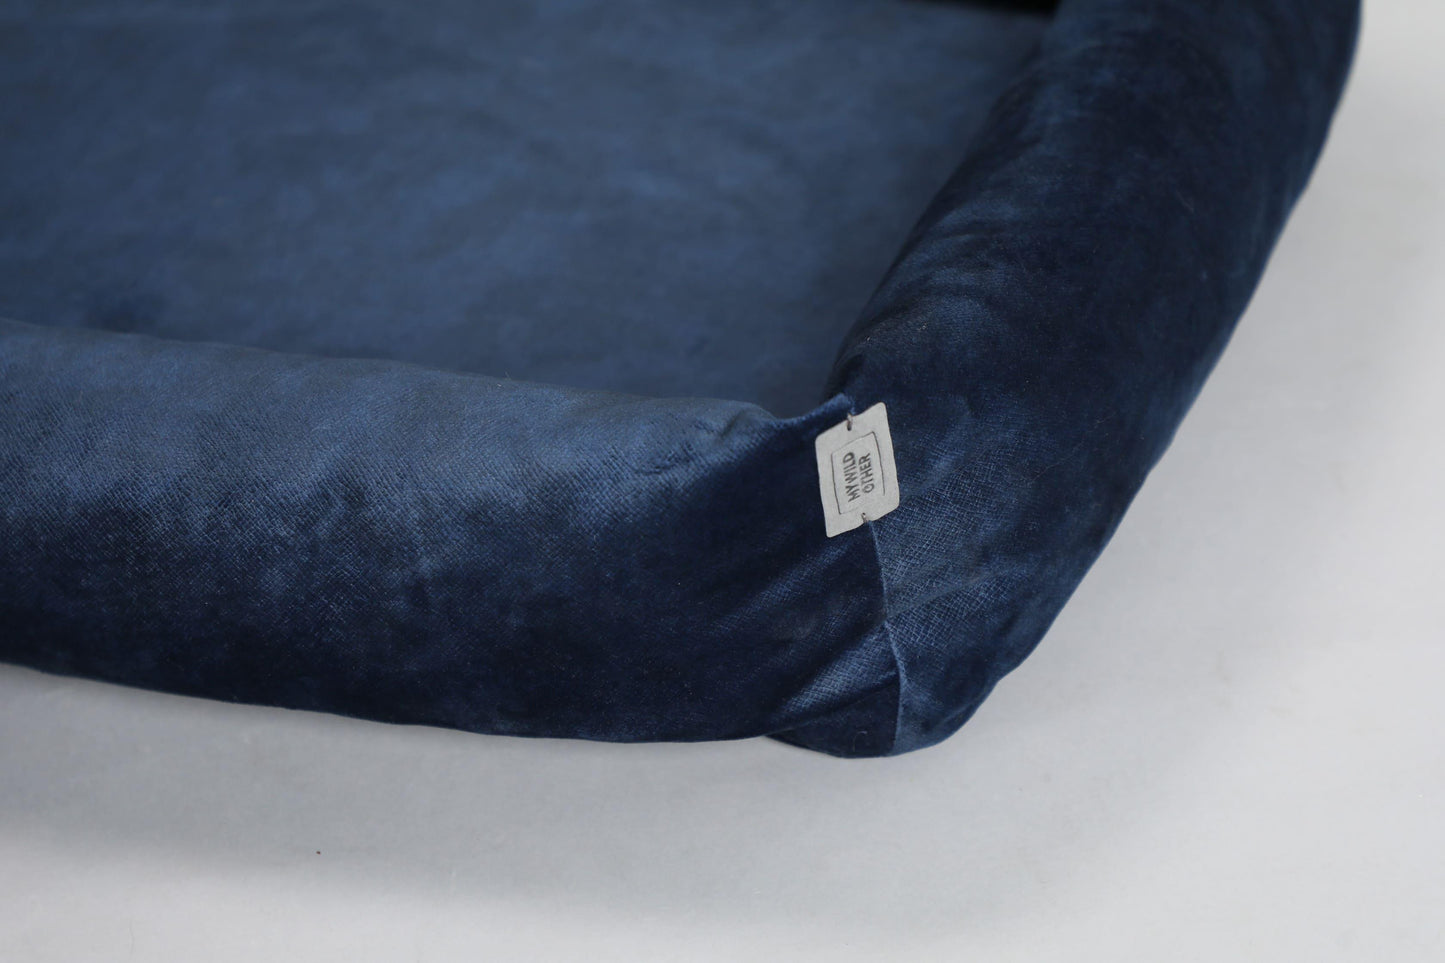 2-sided classic dog bed. ROYAL BLUE - European handmade dog accessories by My Wild Other